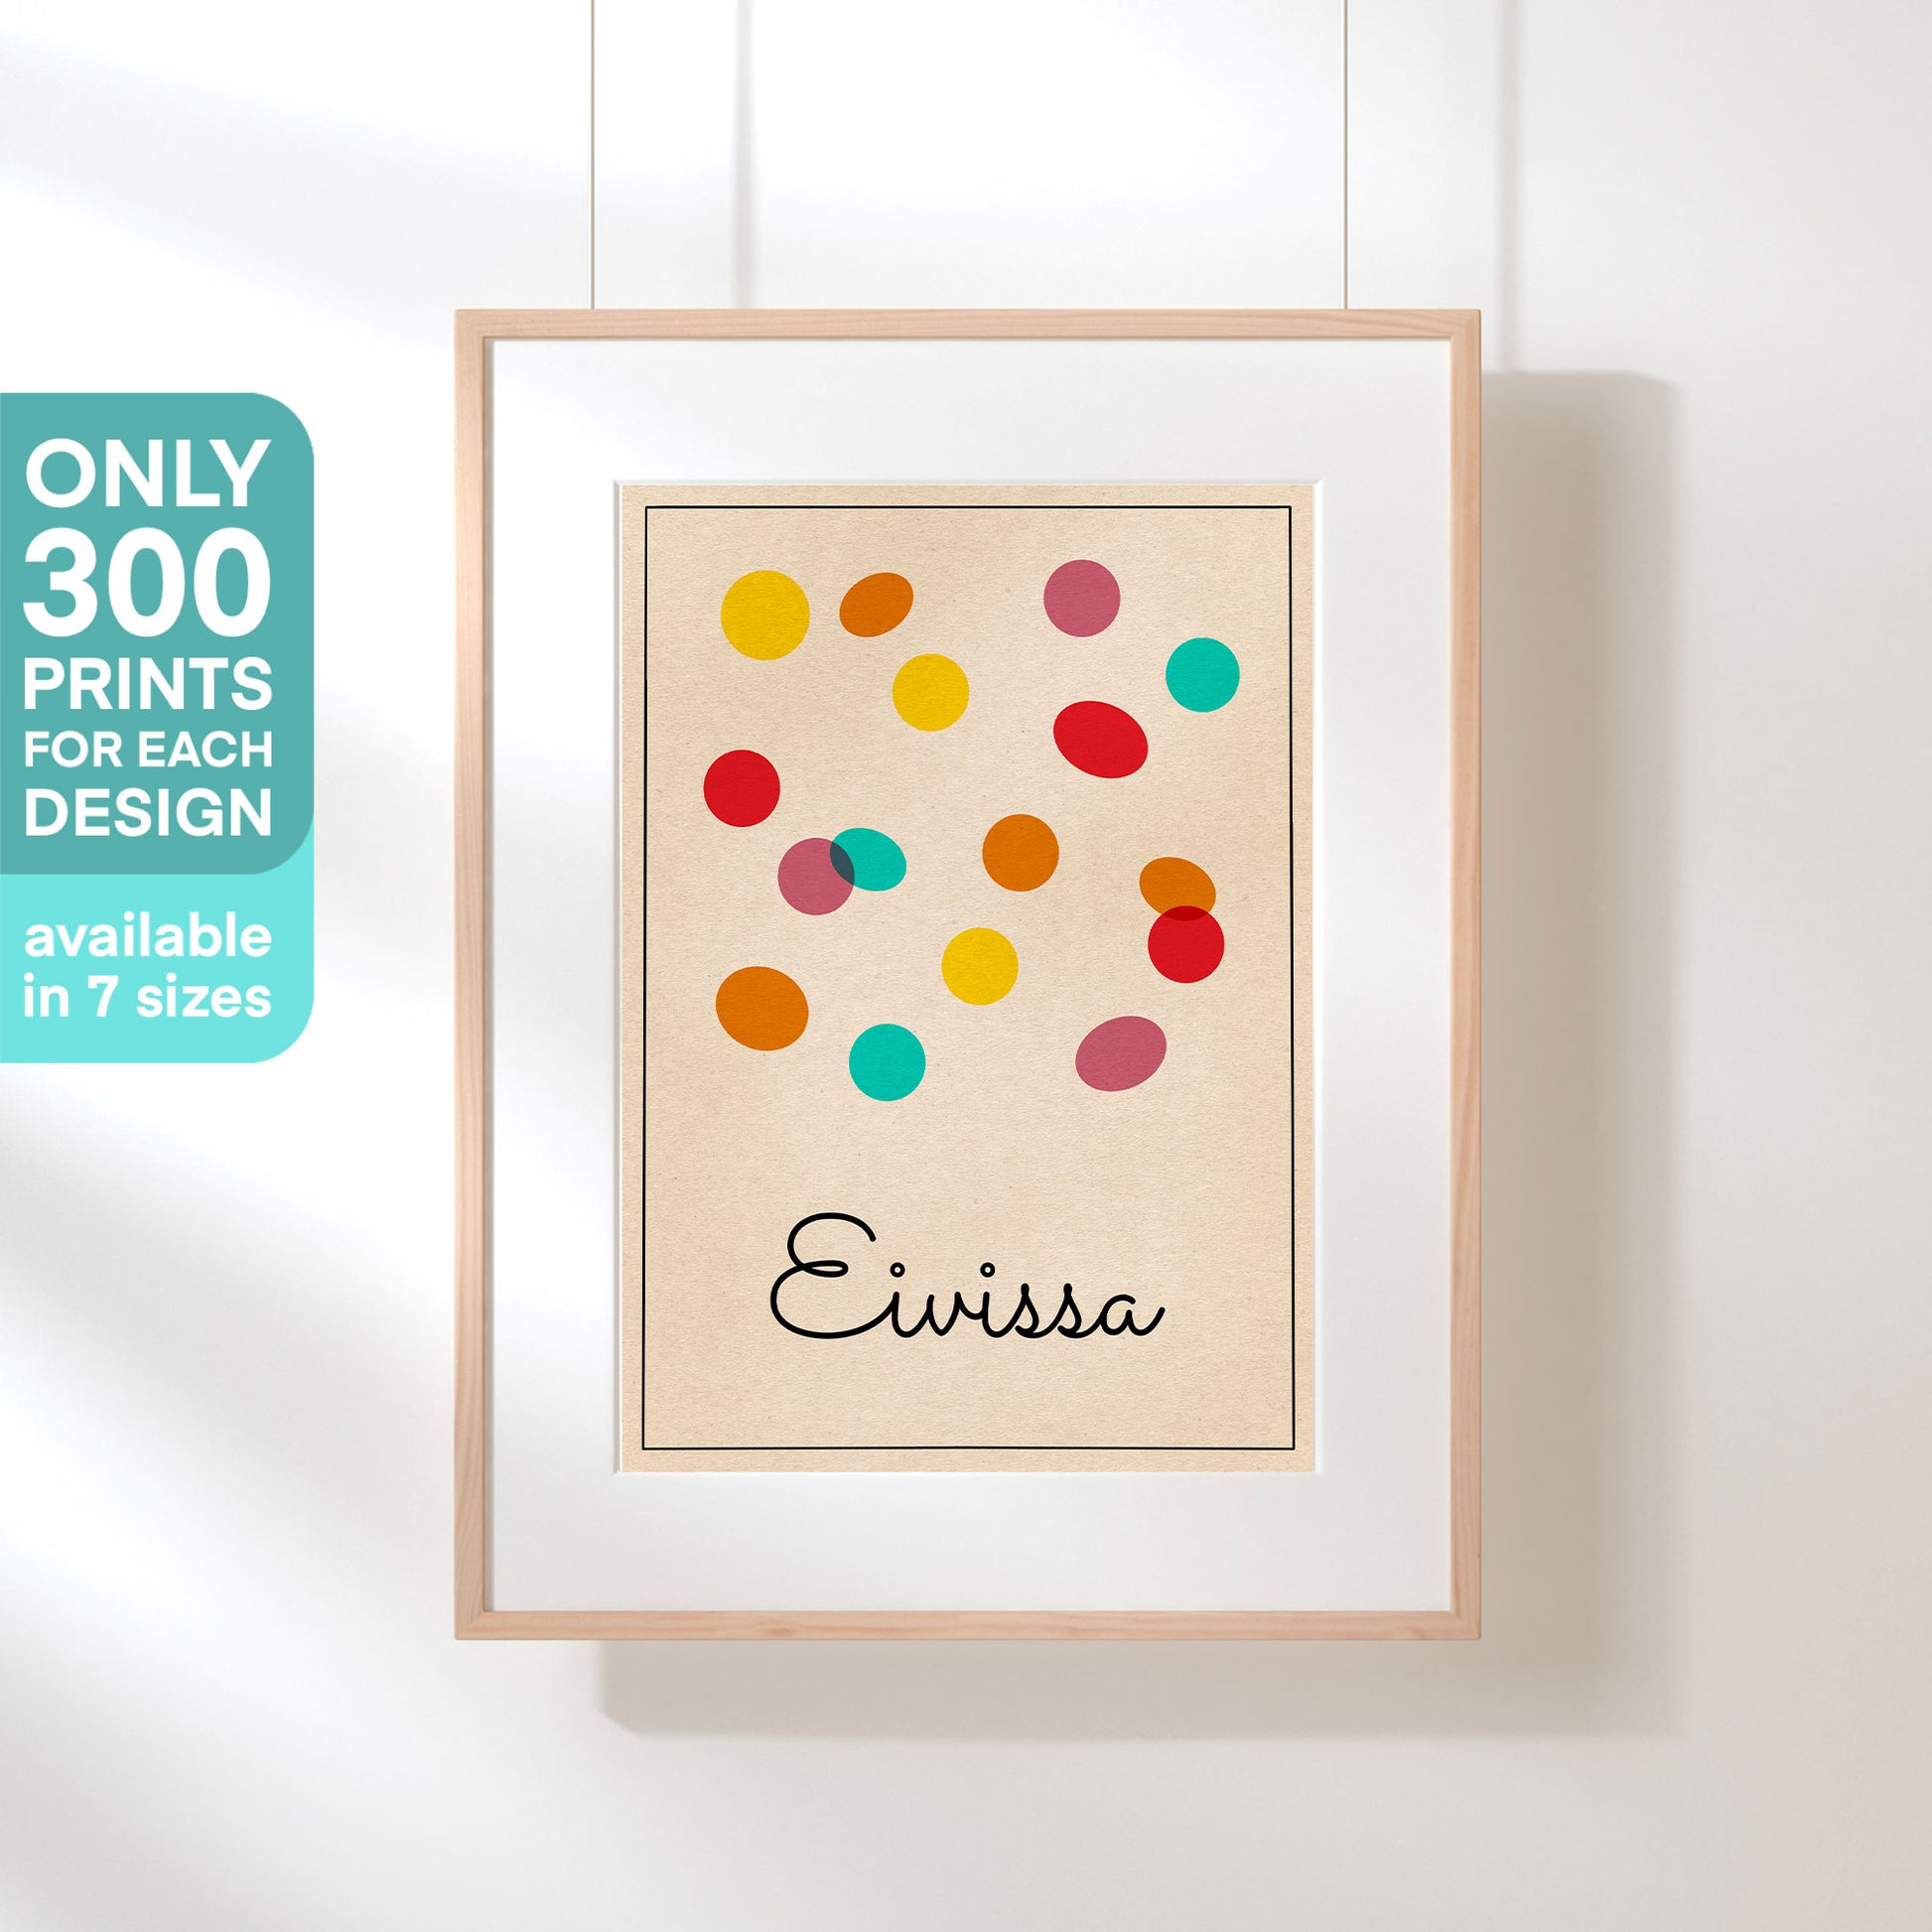 Minimalist 'Eivissa Bubbles' poster by Cha™ displayed in a stylish hanging frame, 300ex only